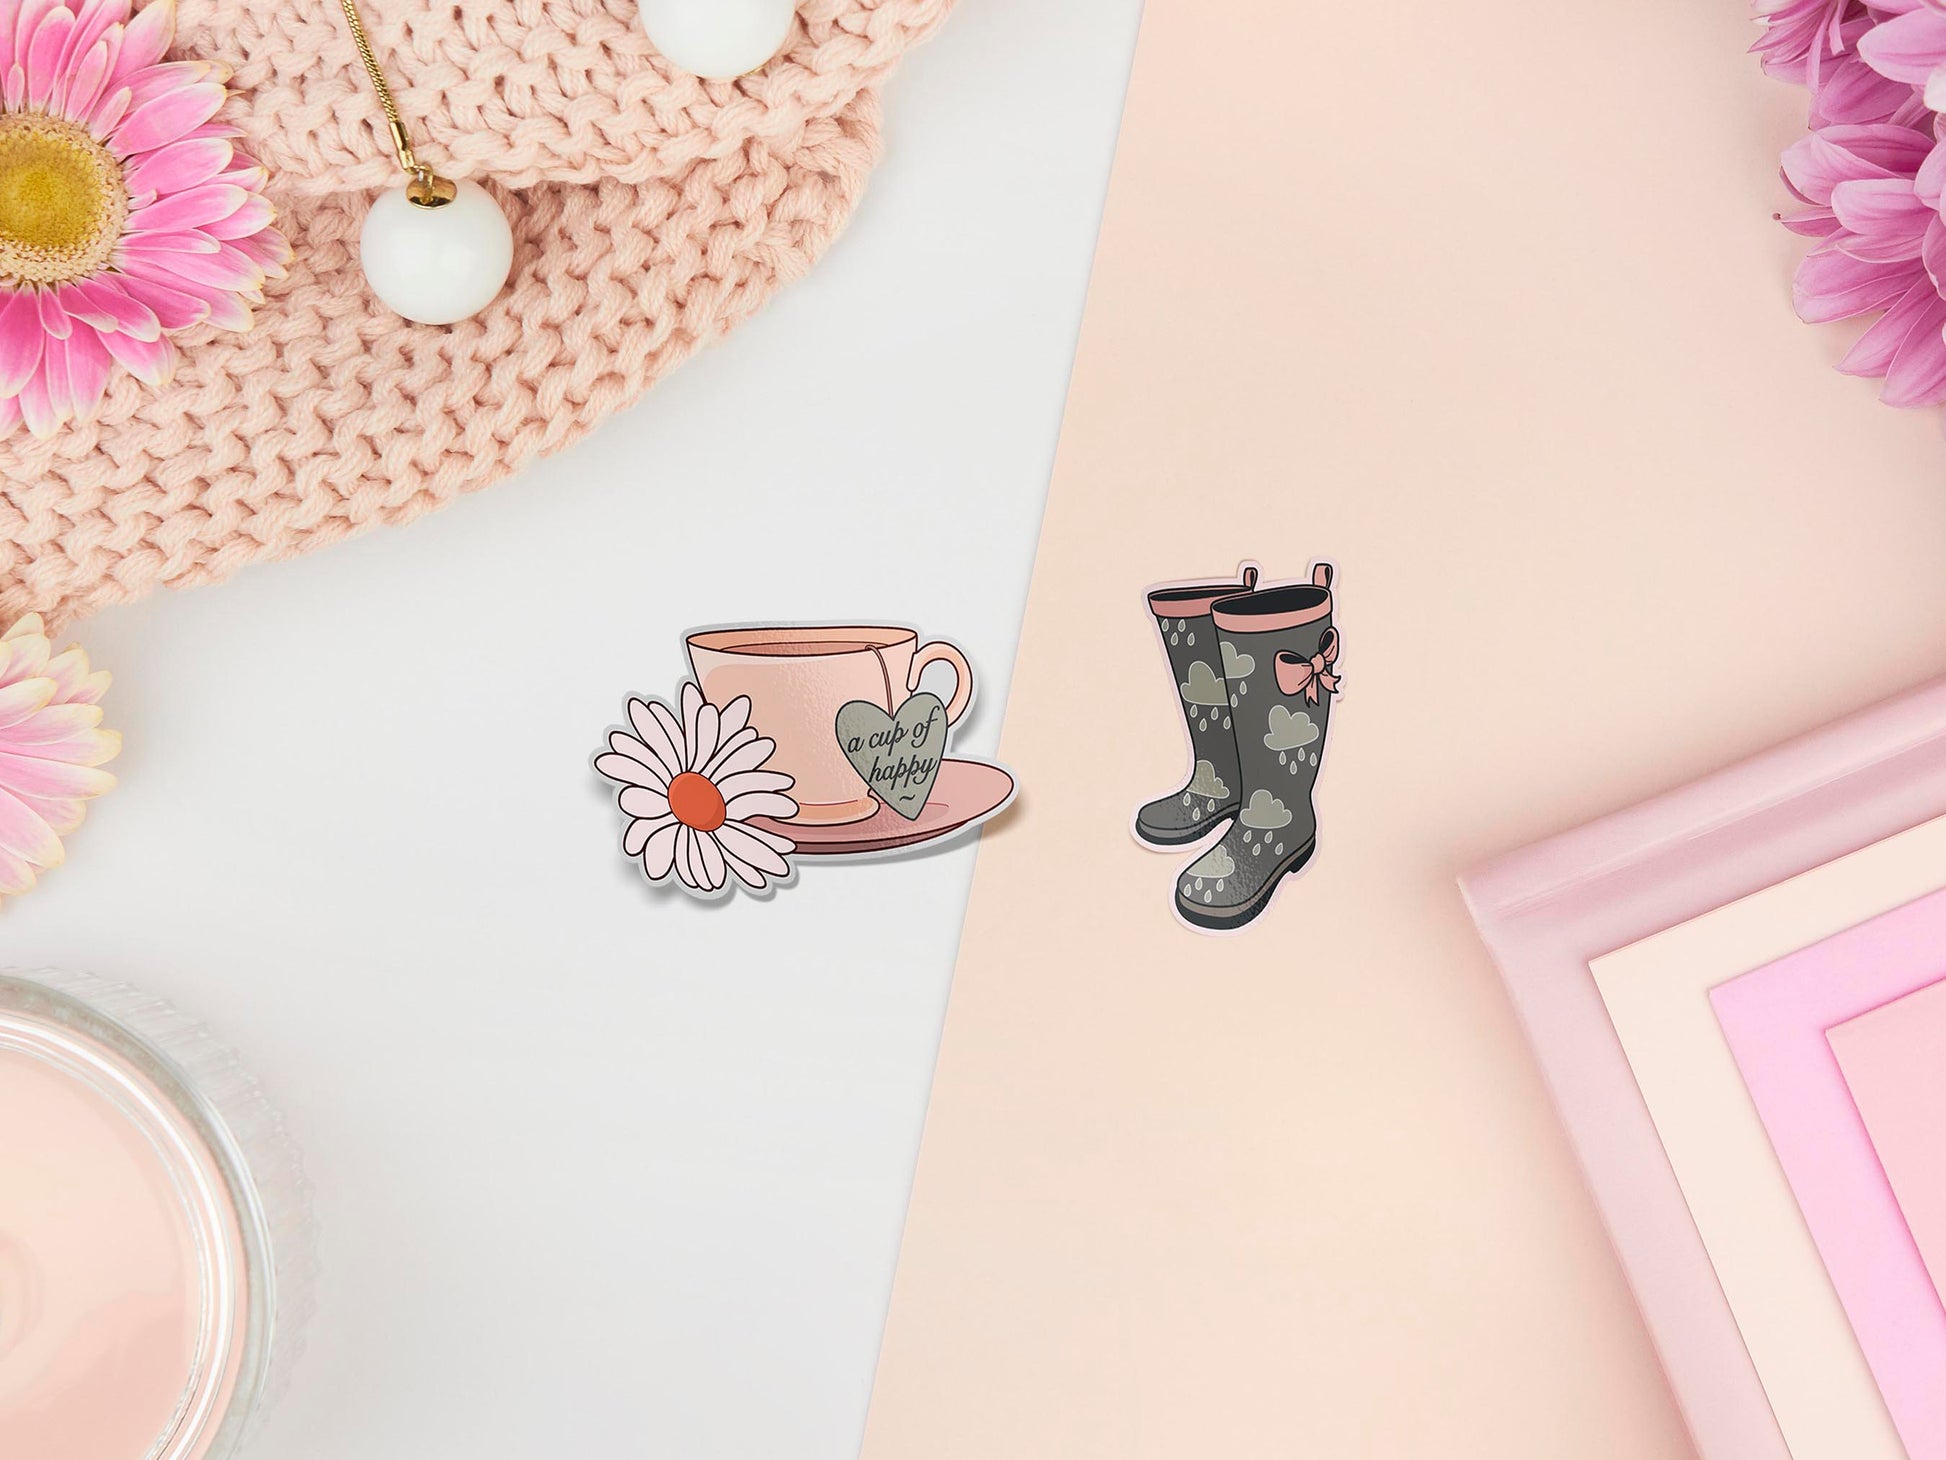 Two stickers of digital illustration cartoons of a cup of tea with glowers and the words a cup of happy and wellington boots with a rain cloud pattern and bow